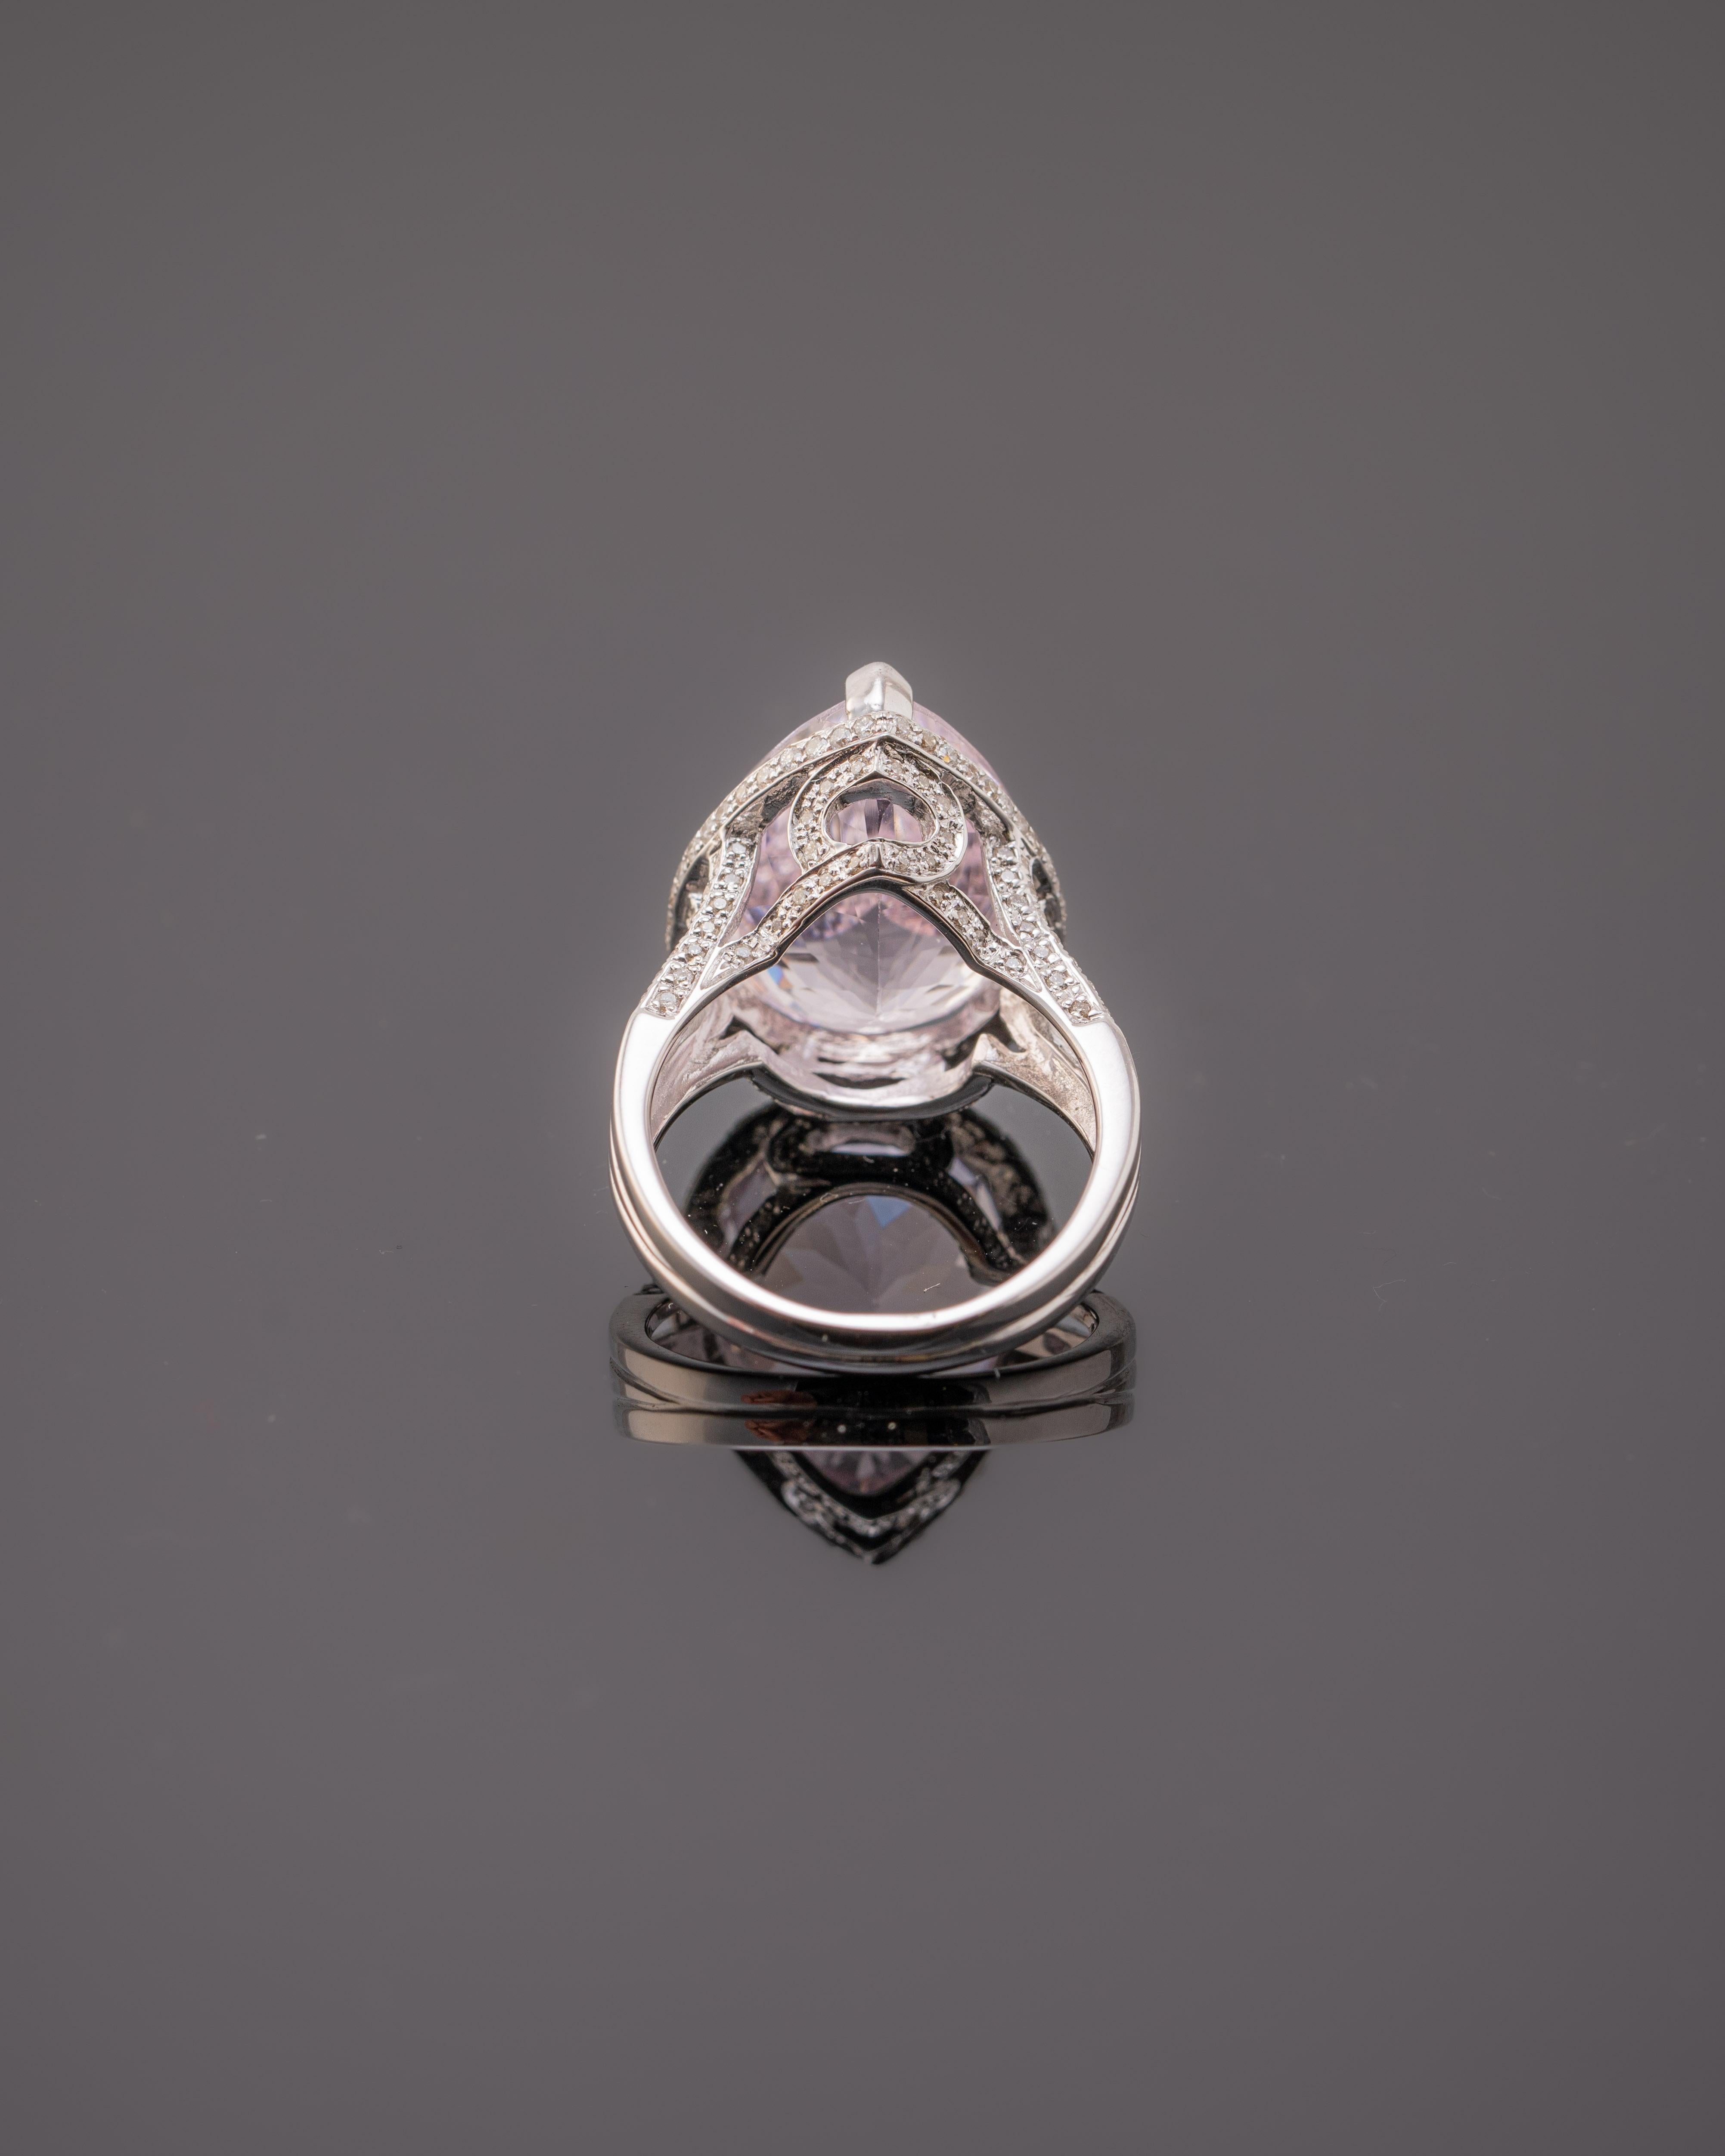 A lovely Engagement Ring Option or as an alternate to a Pink Diamond Ring! This simply stunning Kunzite Diamond Ring has a 14.6 Carat Pear Cut Kunzite as its center and has a beautiful simple halo along with two lines of Round Cut Diamonds that